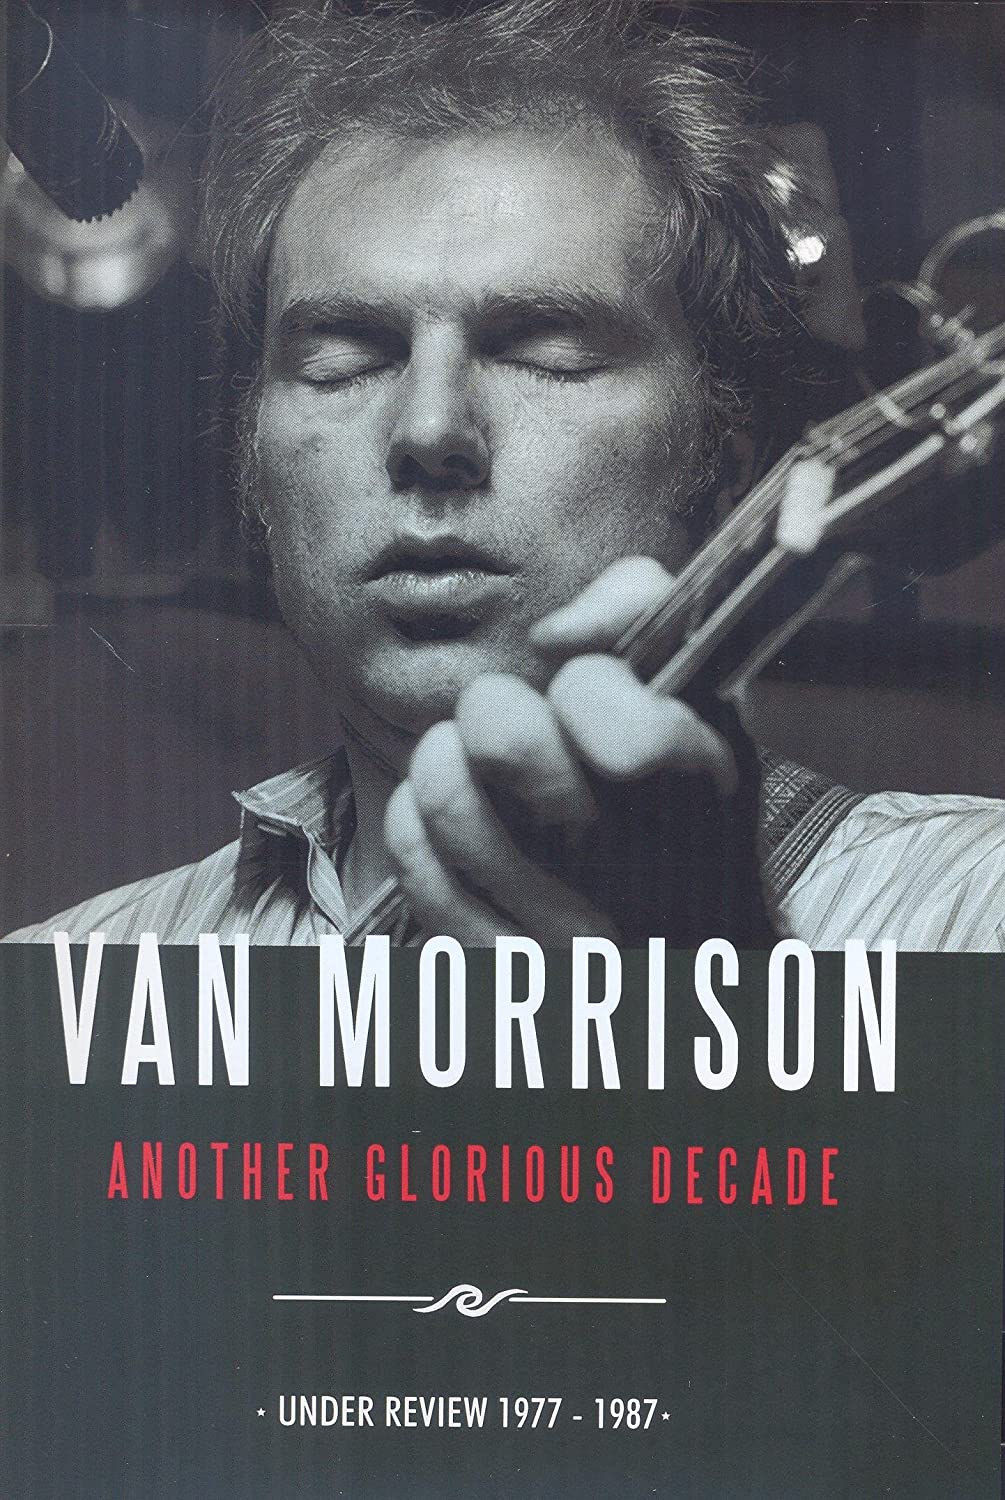 Van Morrison- Another Glorious Decade: Under Review 1977-1987 - Darkside Records